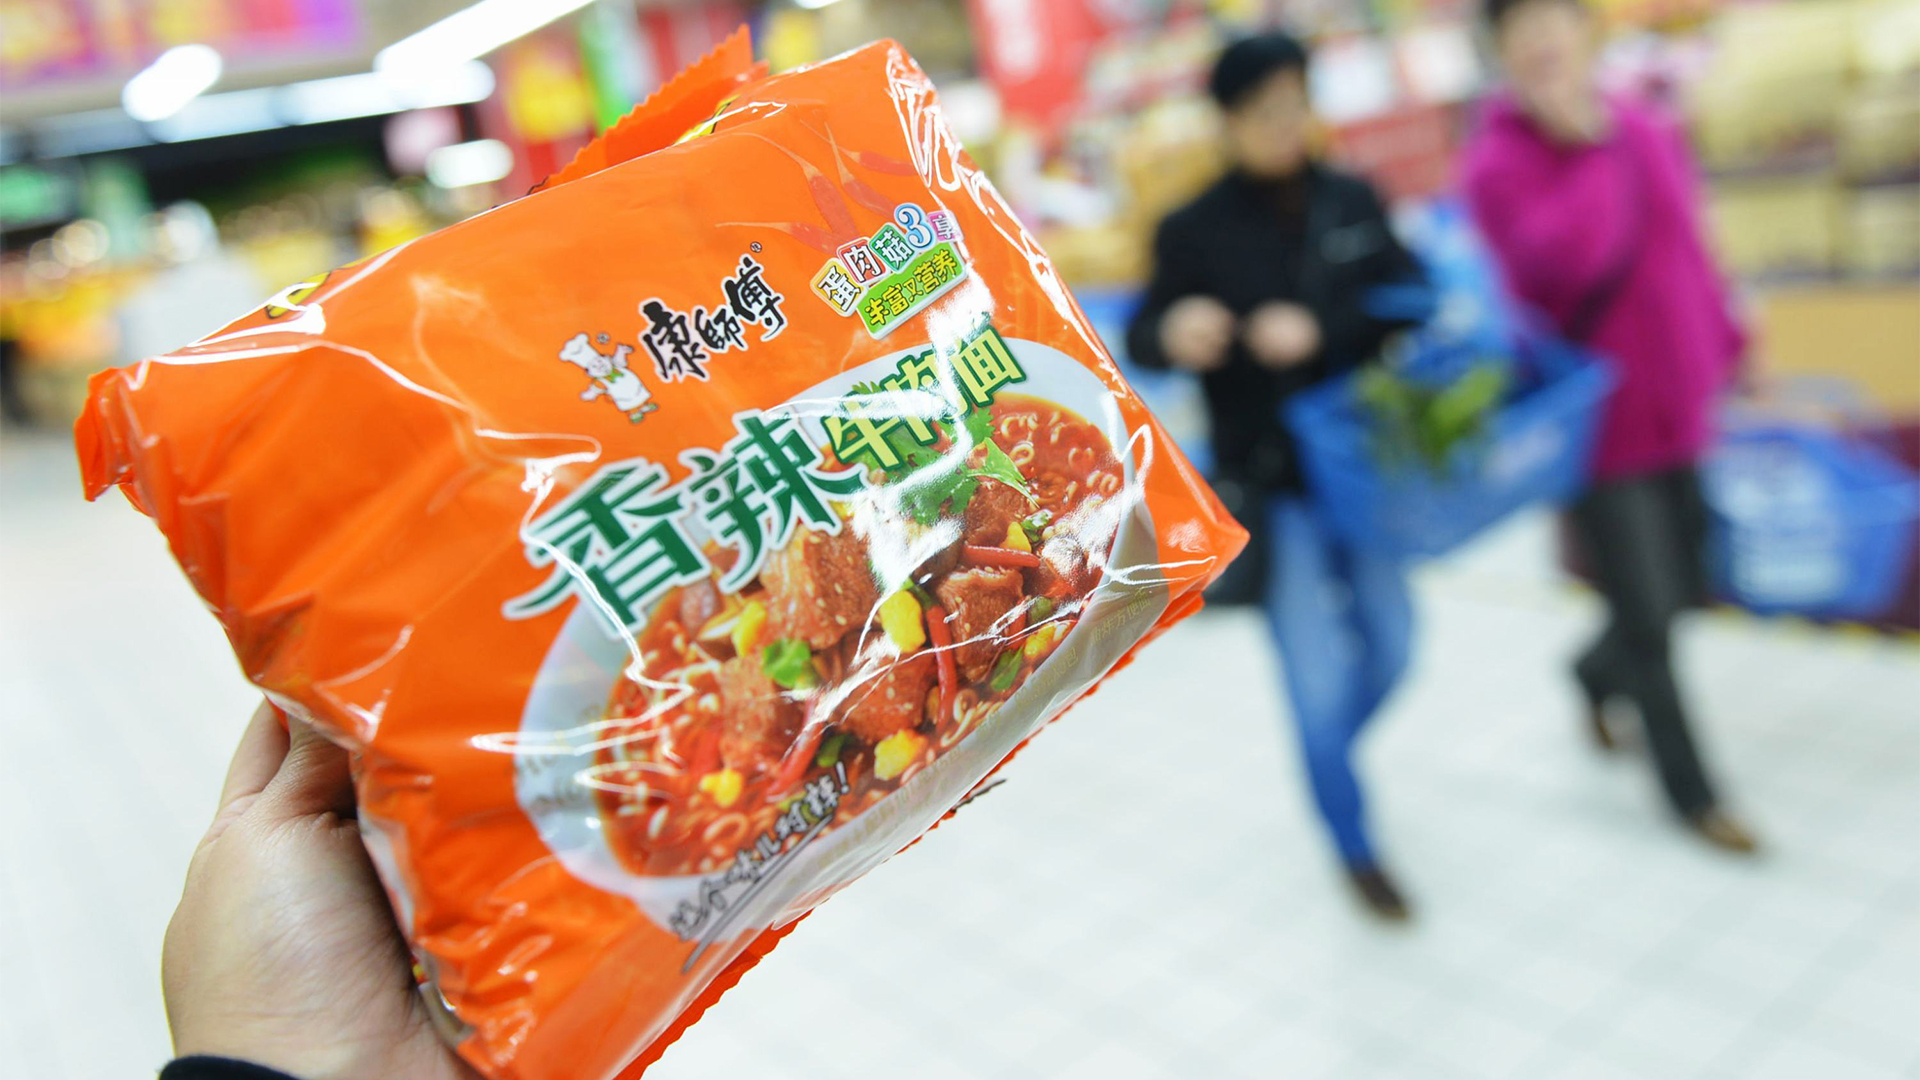 Instant-Nudelsuppe in China | picture alliance / dpa